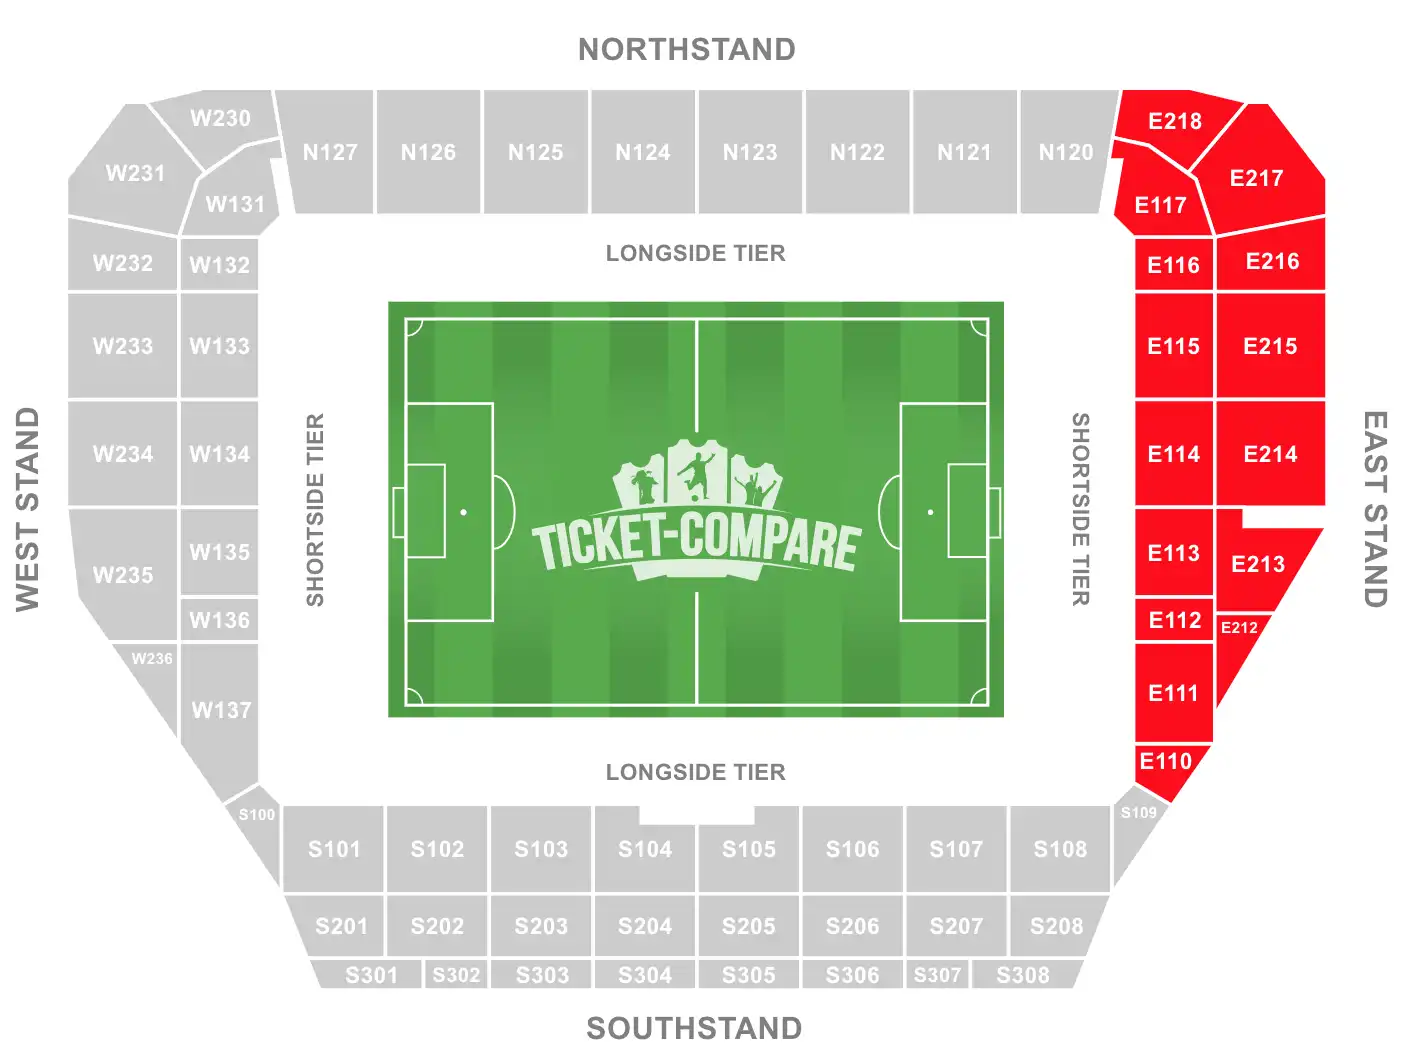 Community Stadium Seating Plan with highligted the East Stand